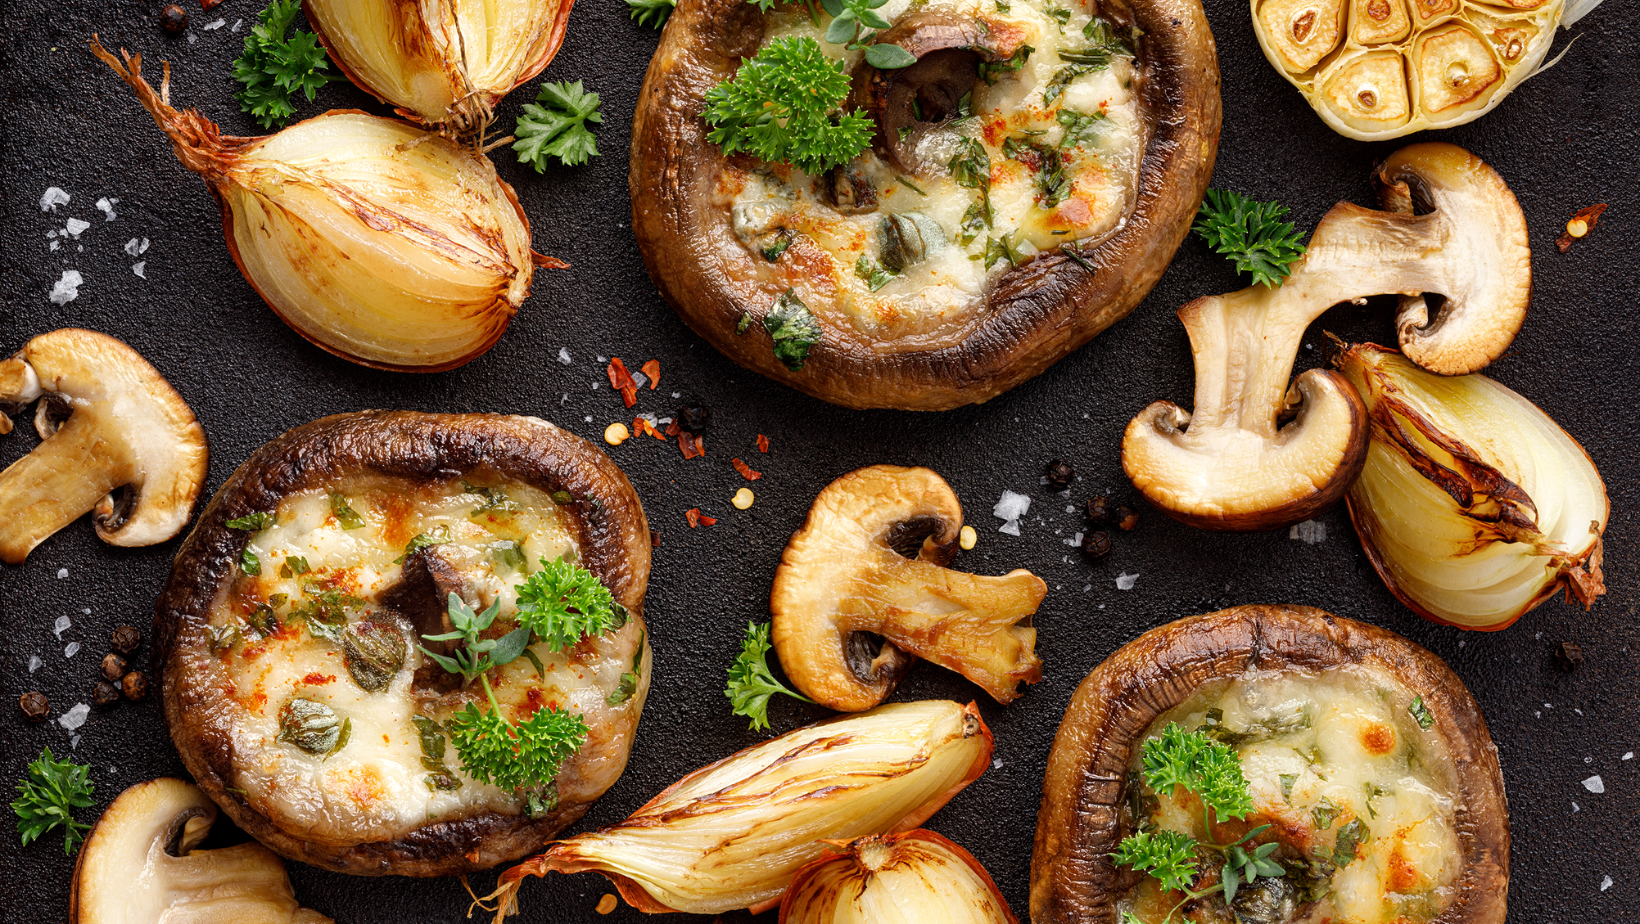 Stuffed portobello mushrooms stuffed with mozzarella and gorgonzola cheese and aromatic herbs on a black background, top view. Vegetarian food